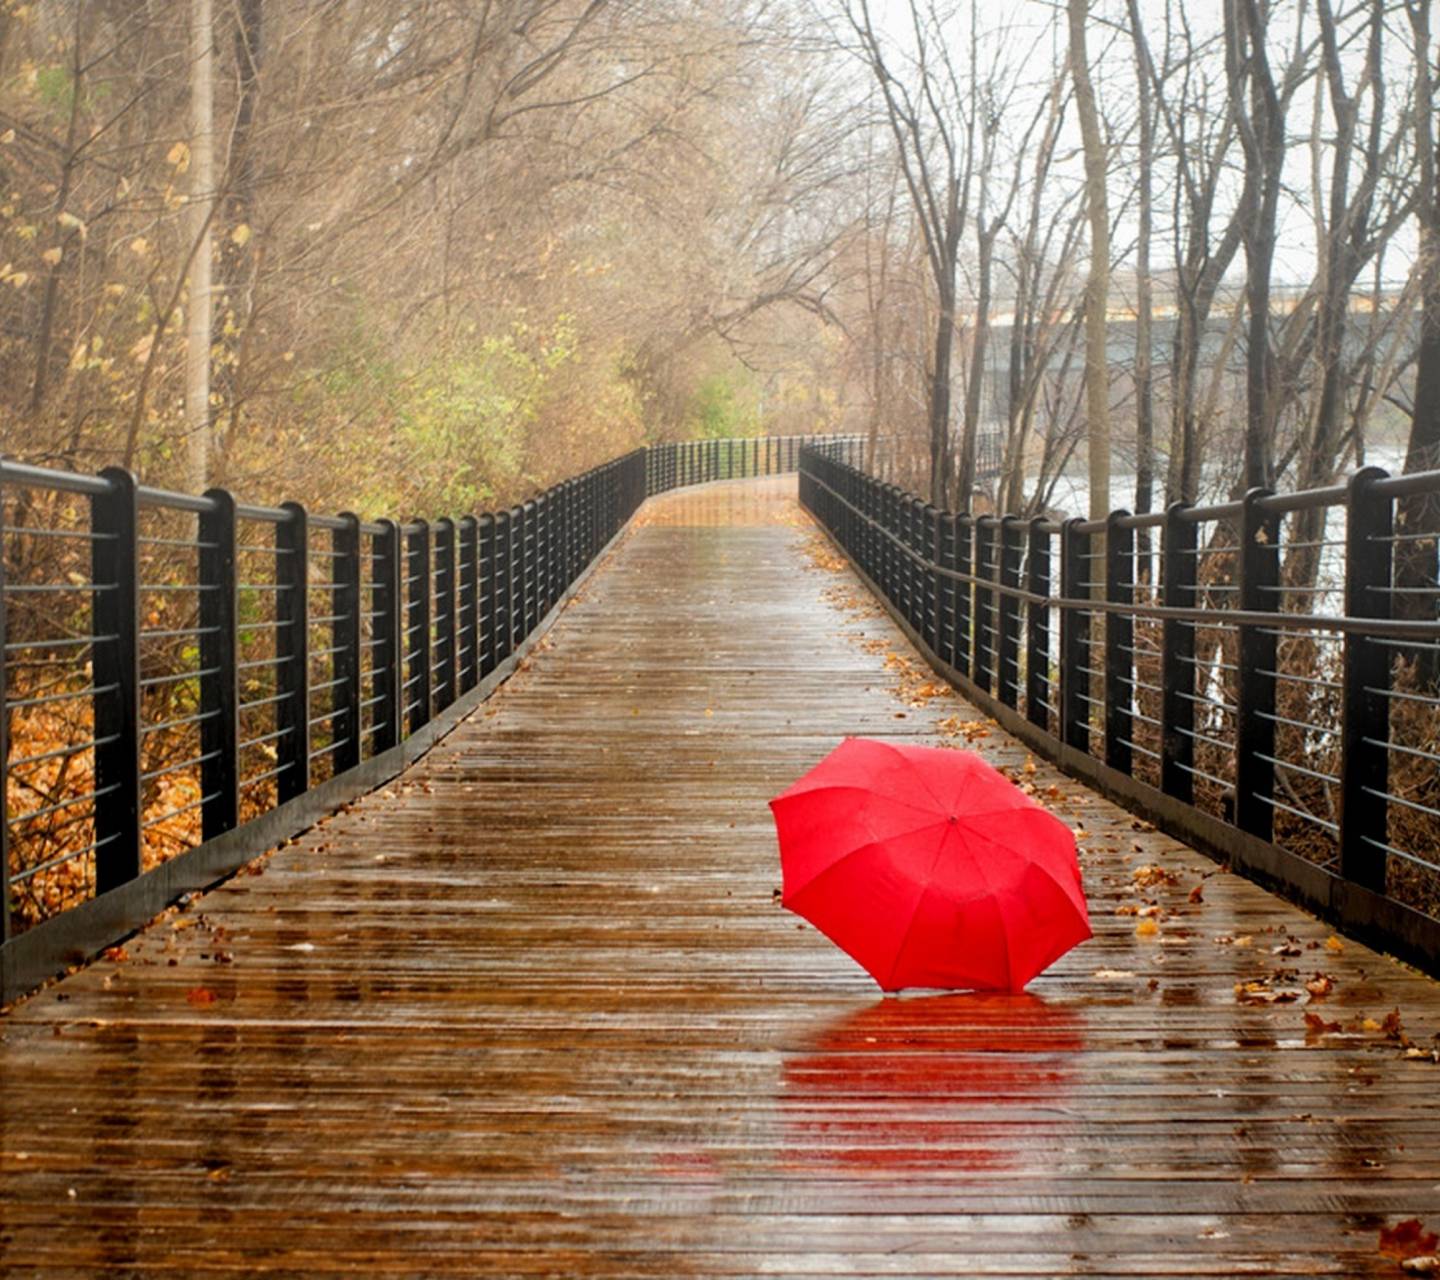 The Ultimate Collection of Rainy Day Images - Over 999 Spectacular ...